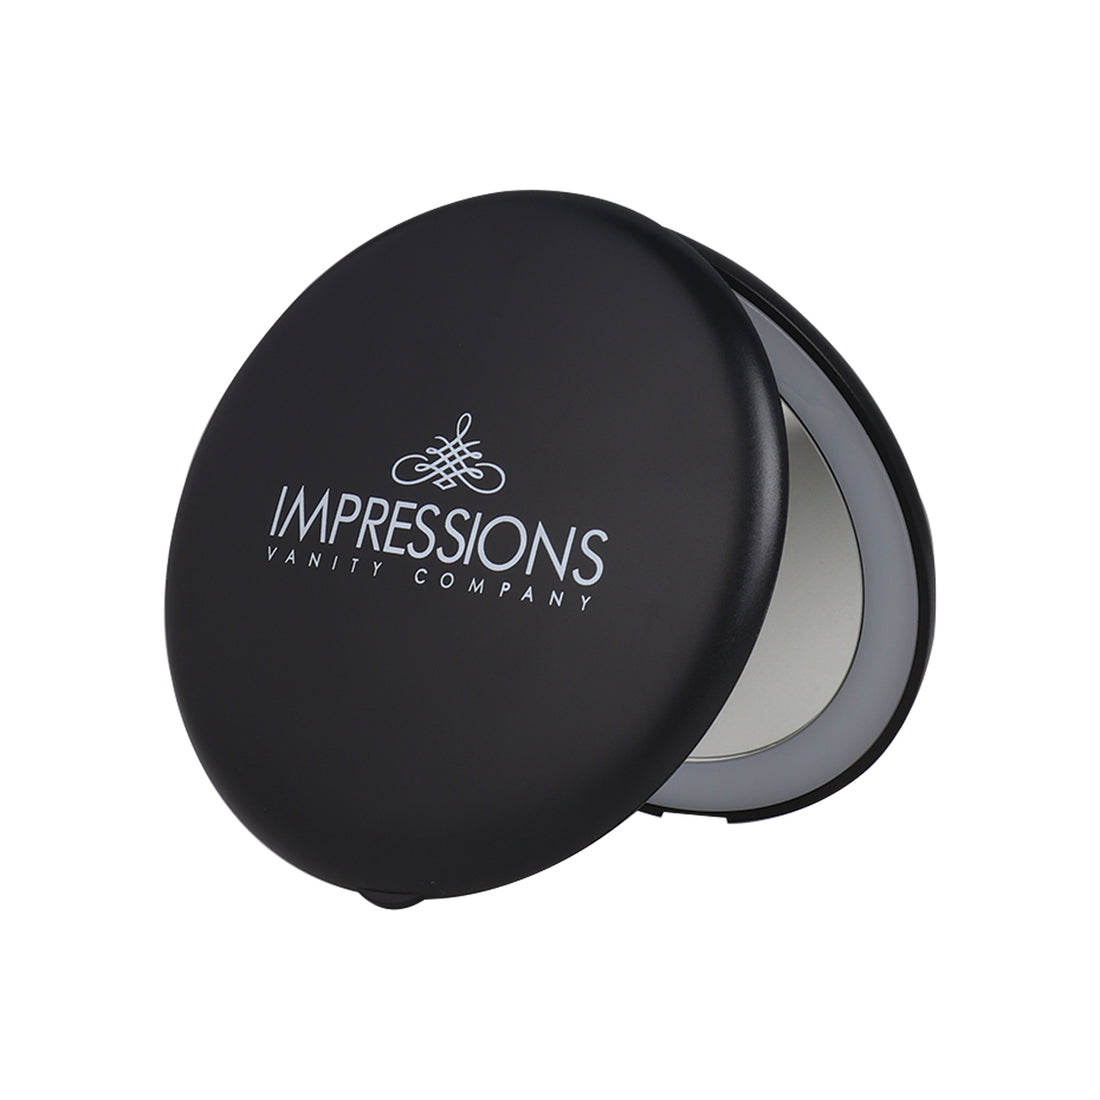 Touch Mini Pearl Compact Mirror • Impressions Vanity Co.